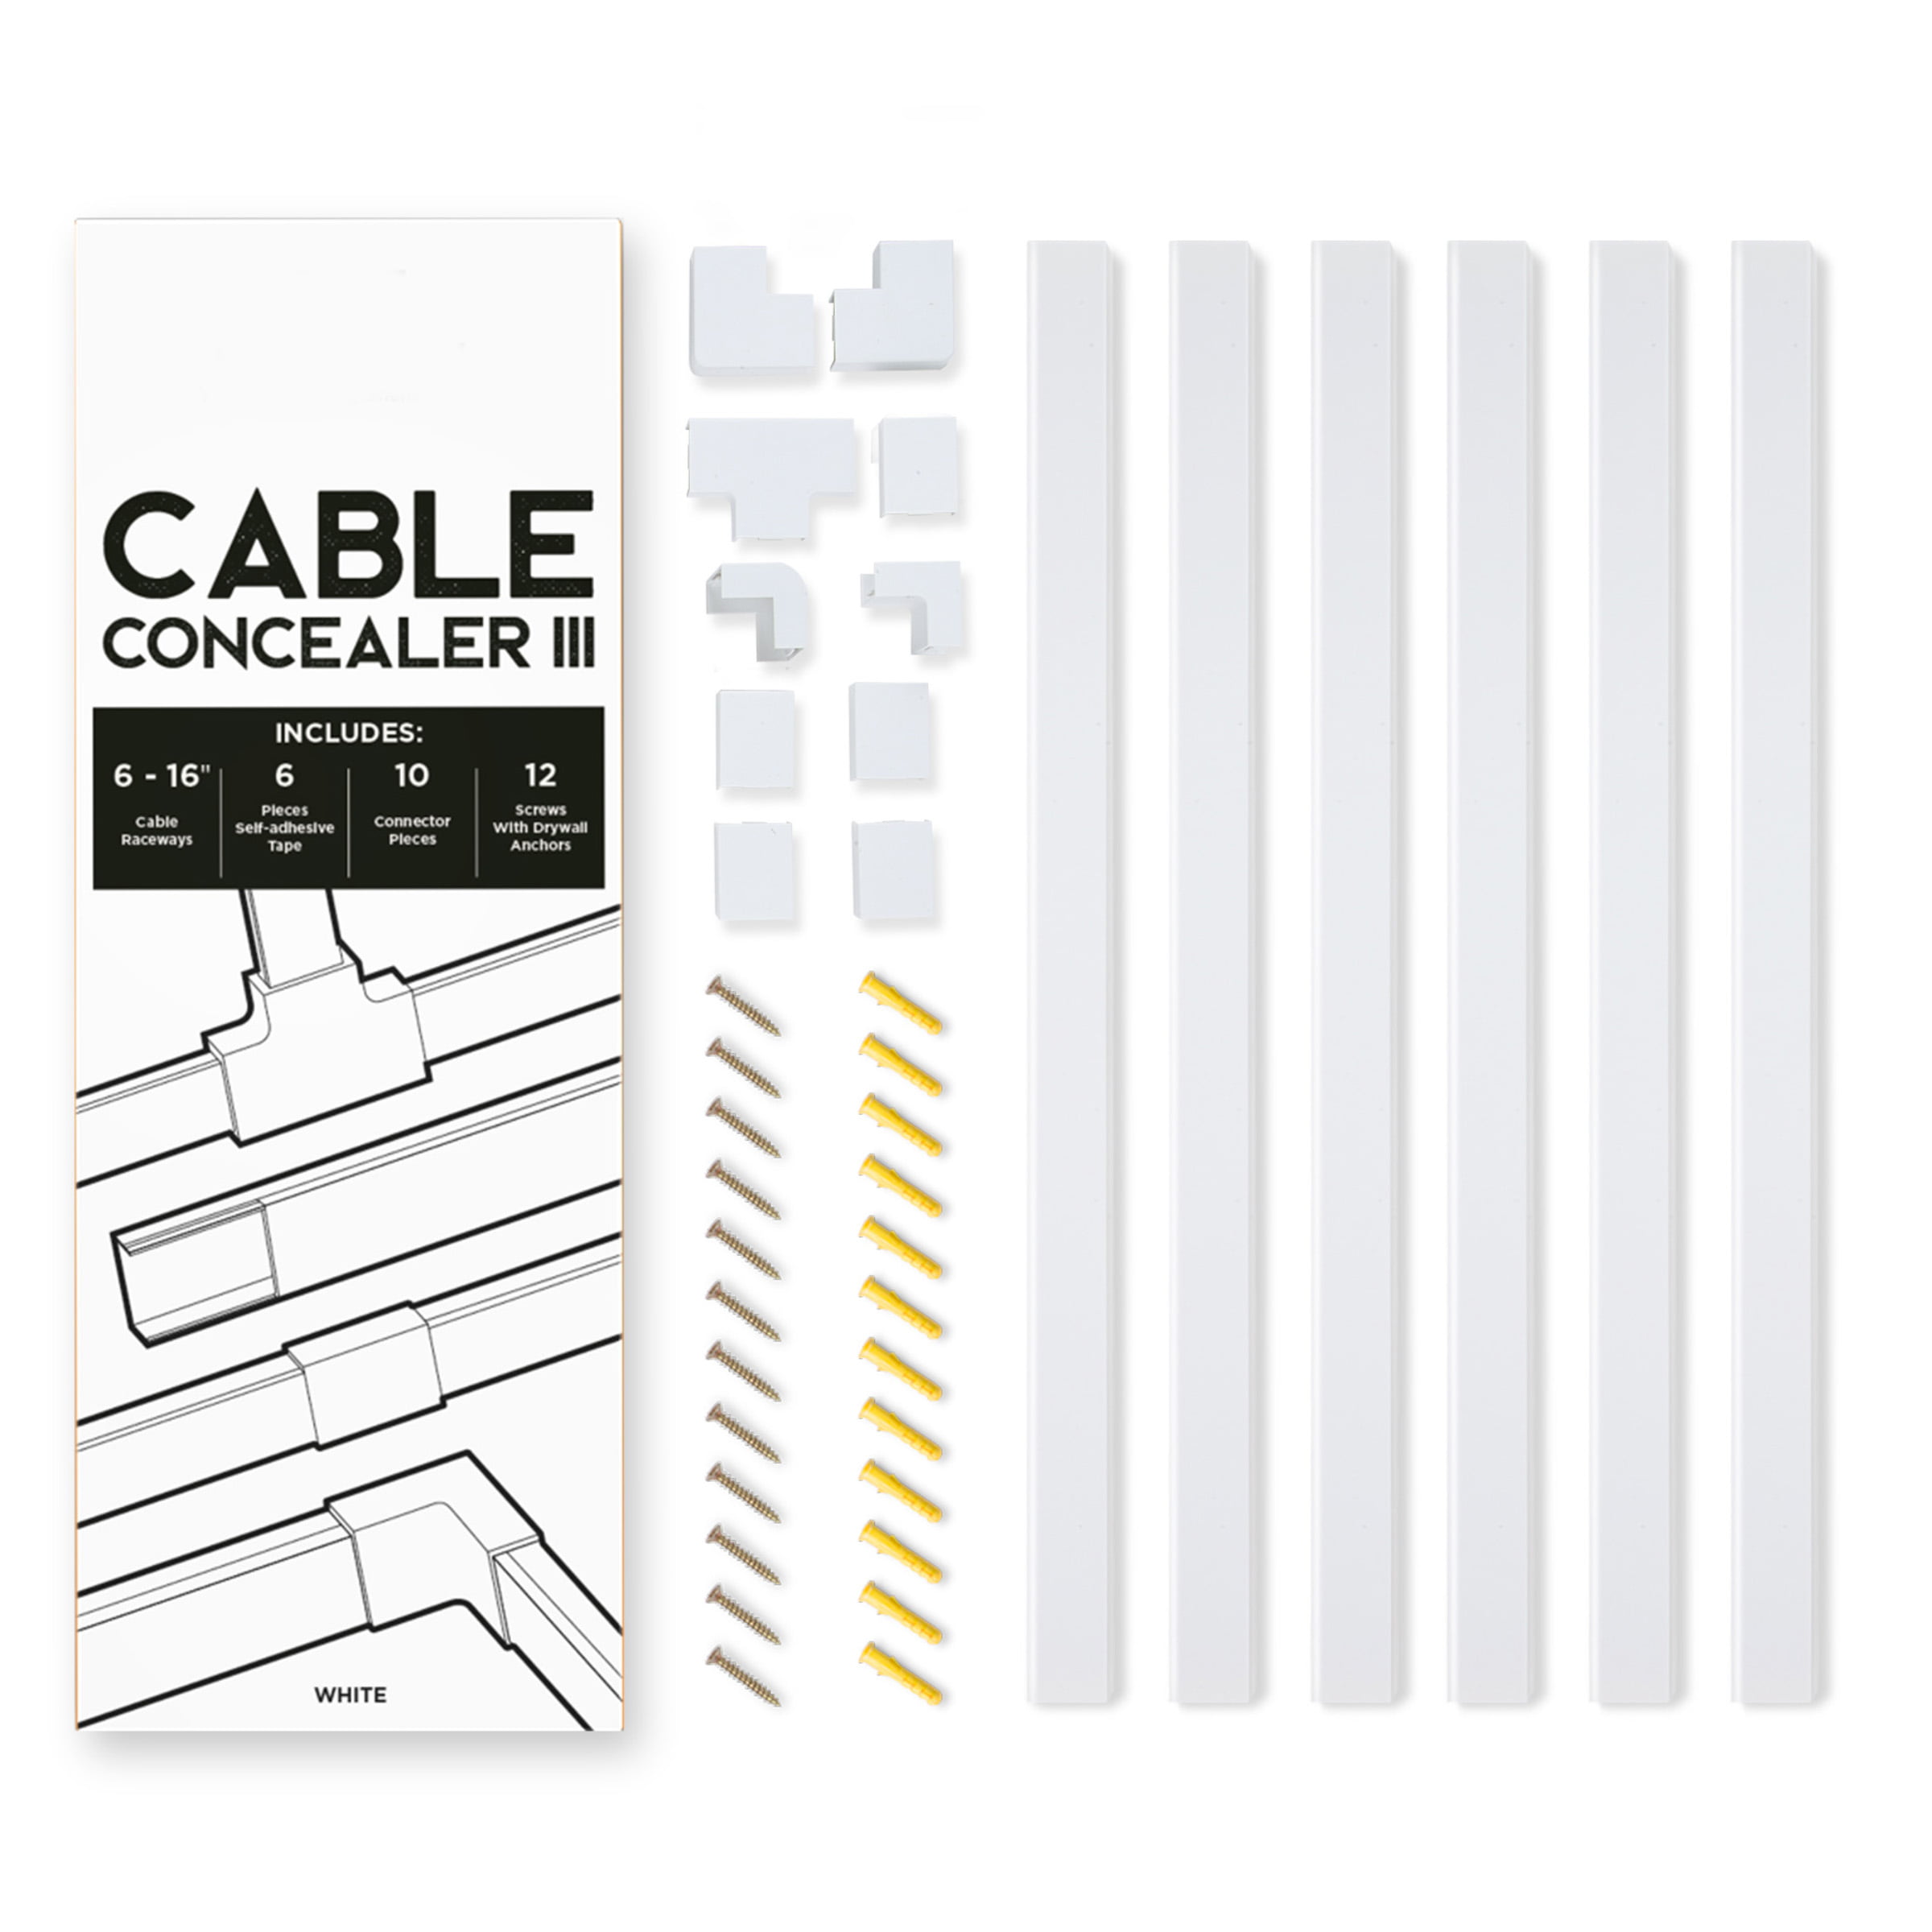 Cable Raceway Wall Mount, Self Adhesive Cord Cables Concealer Kit Arched  Wire Molding Cover for Hiding Electrical Cords Conduit, Wires Management  Kit